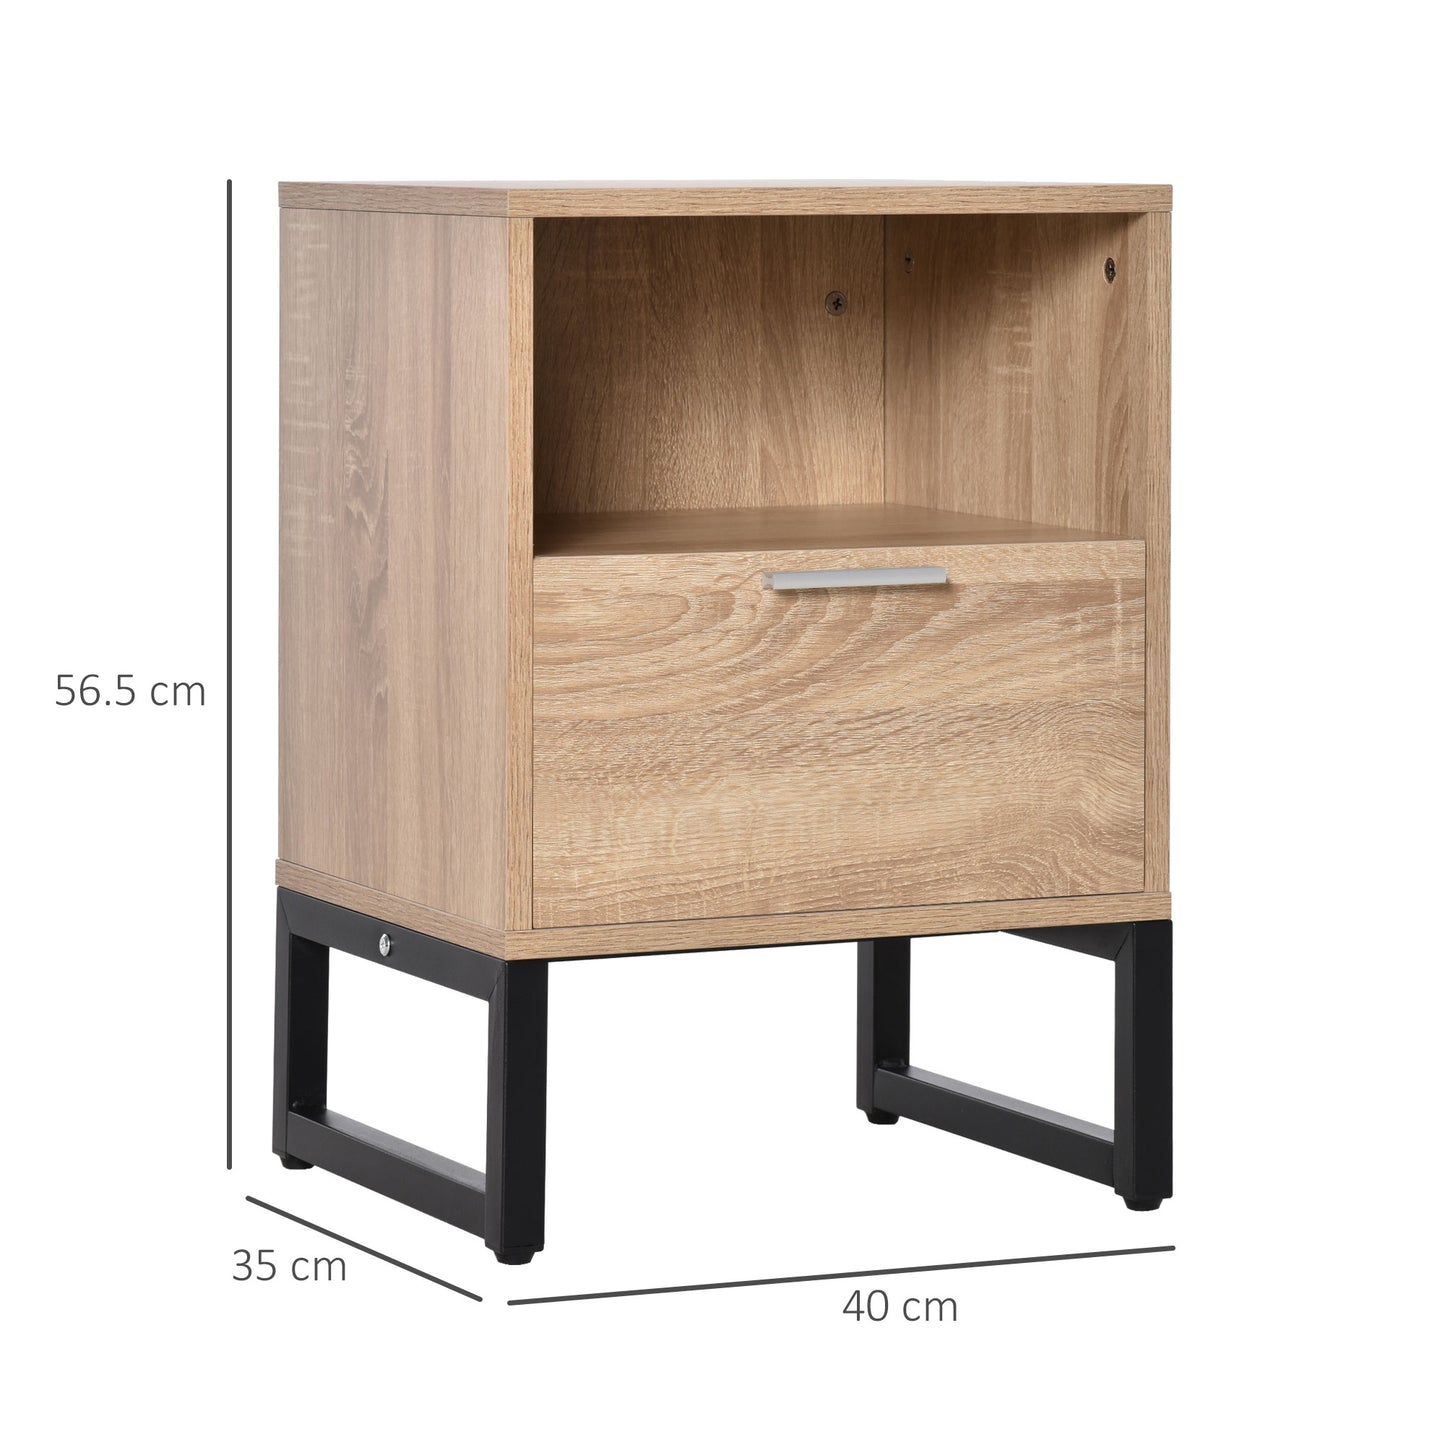 HOMCOM Bedside Table with Drawer and Shelf, Living Room End Table, Bedroom Nightstand